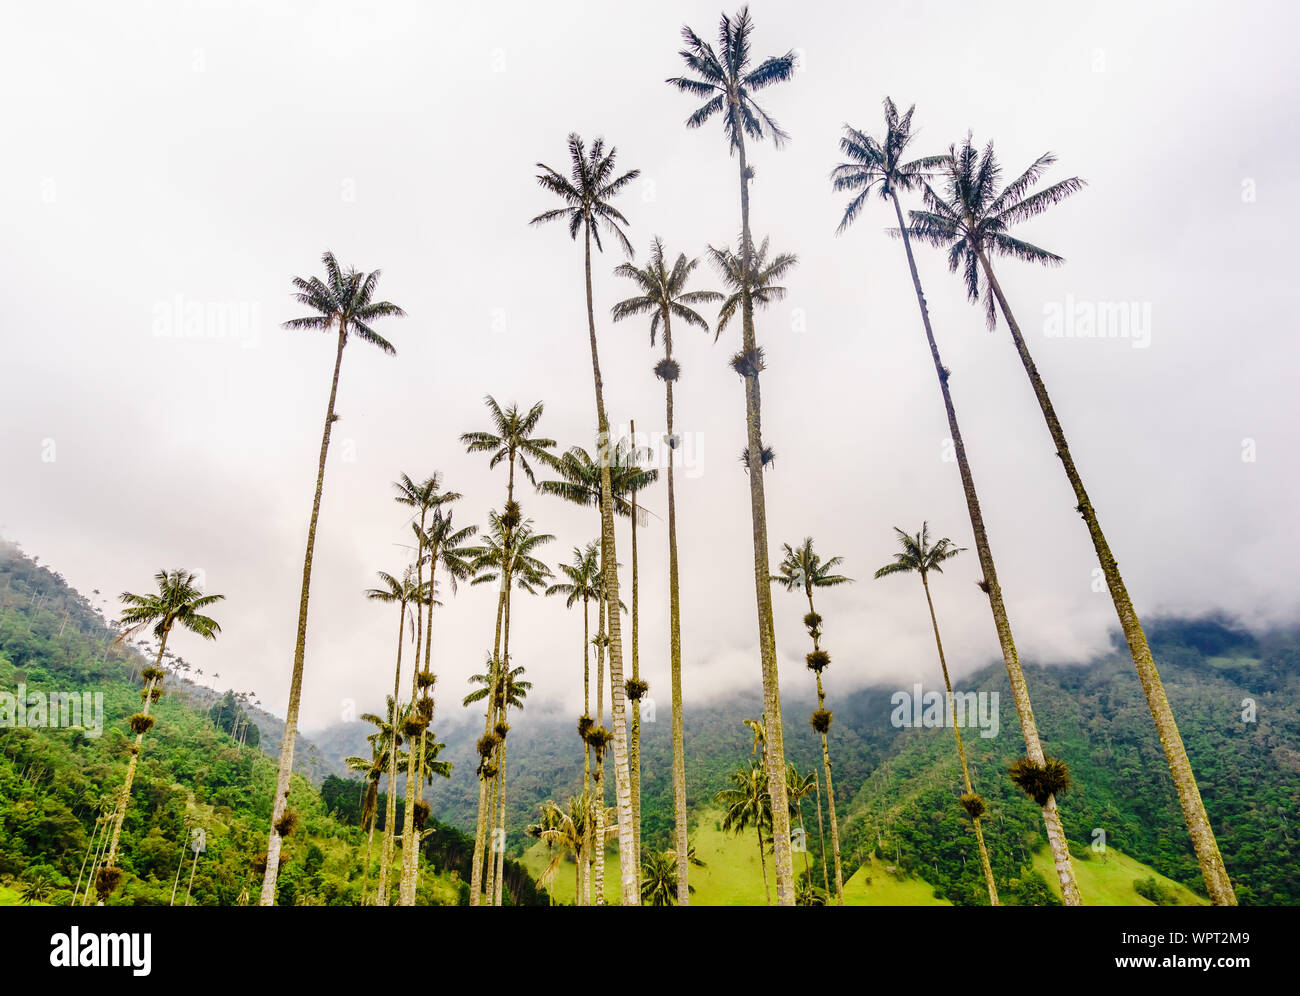 View on wax palm trees of Cocora Valley next to Salento, Colombia Stock Photo